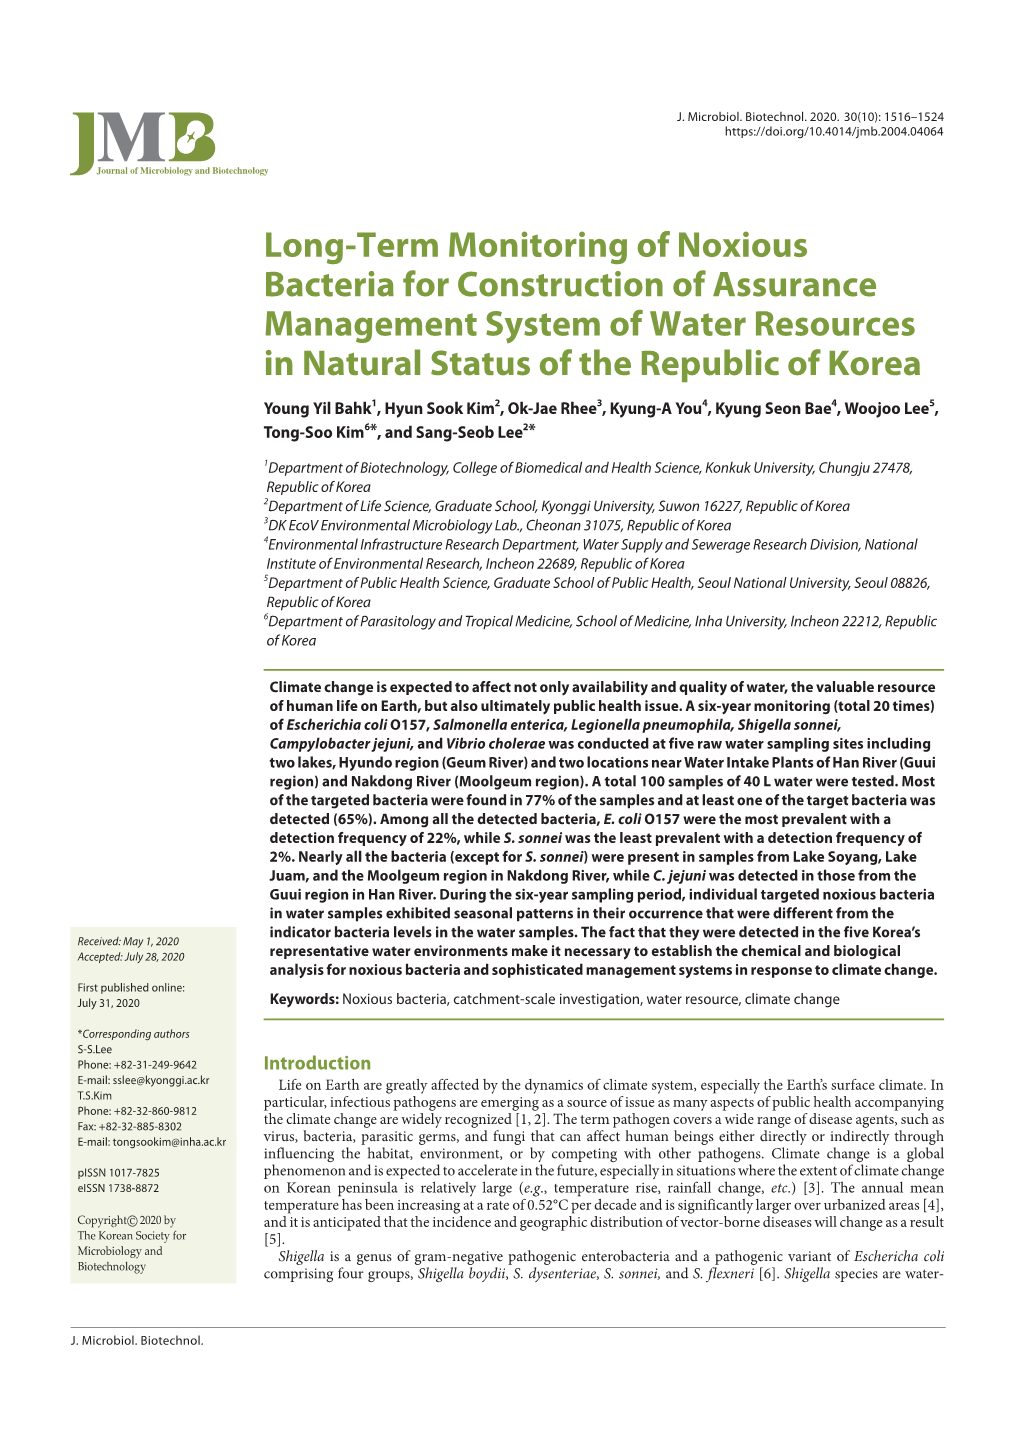 Long-Term Monitoring of Noxious Bacteria for Construction of Assurance Management System of Water Resources in Natural Status of the Republic of Korea